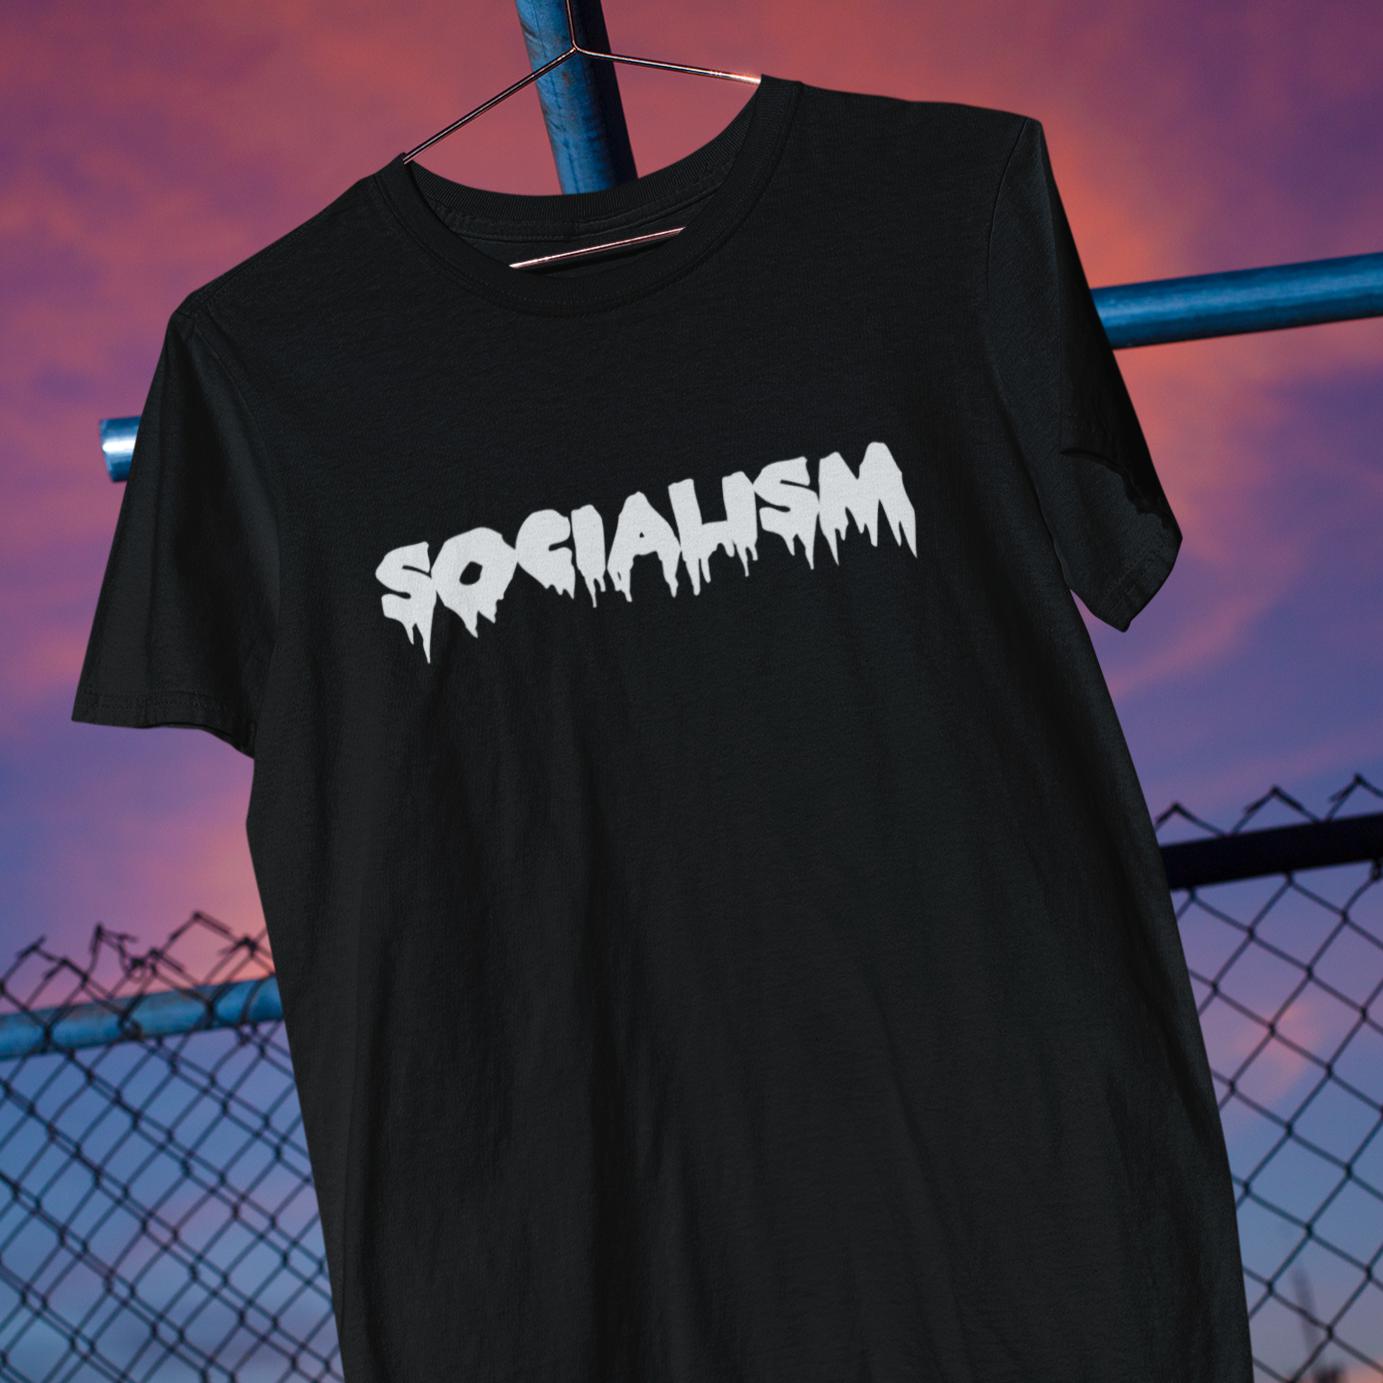 Black unisex t-shirt with the word "socialism" in white spooky scary dripping font 